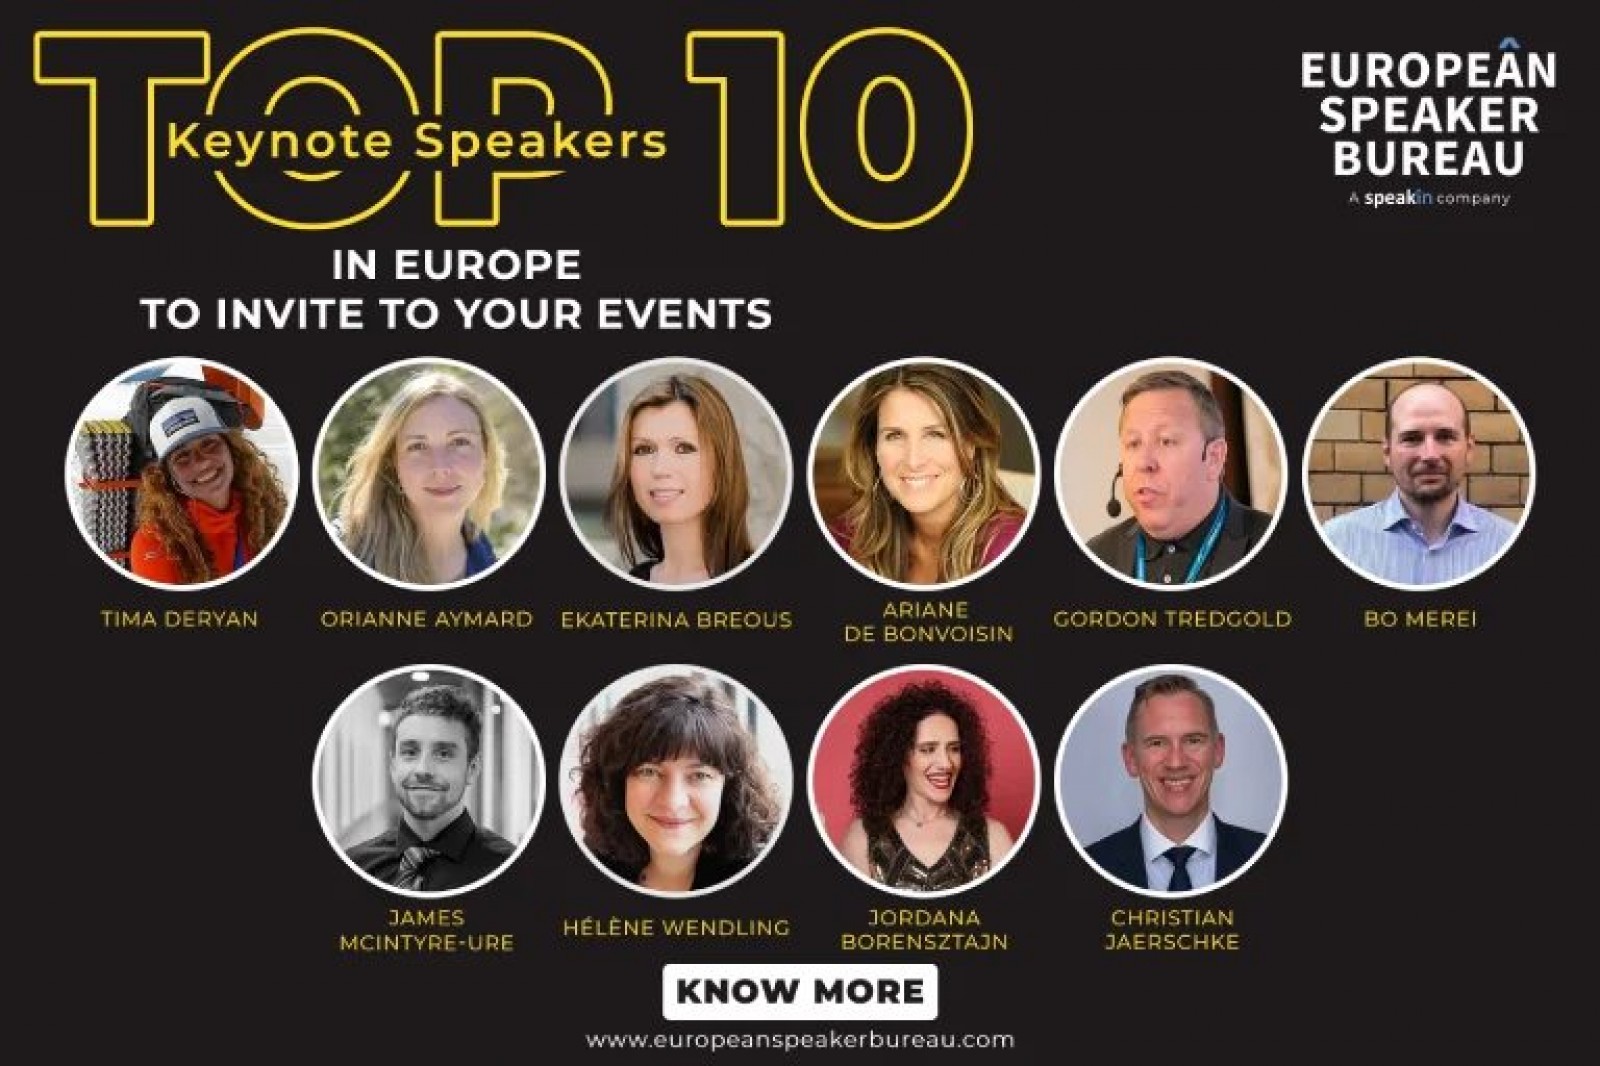 Top 10 Keynote Speakers in Europe to Invite to Your Events